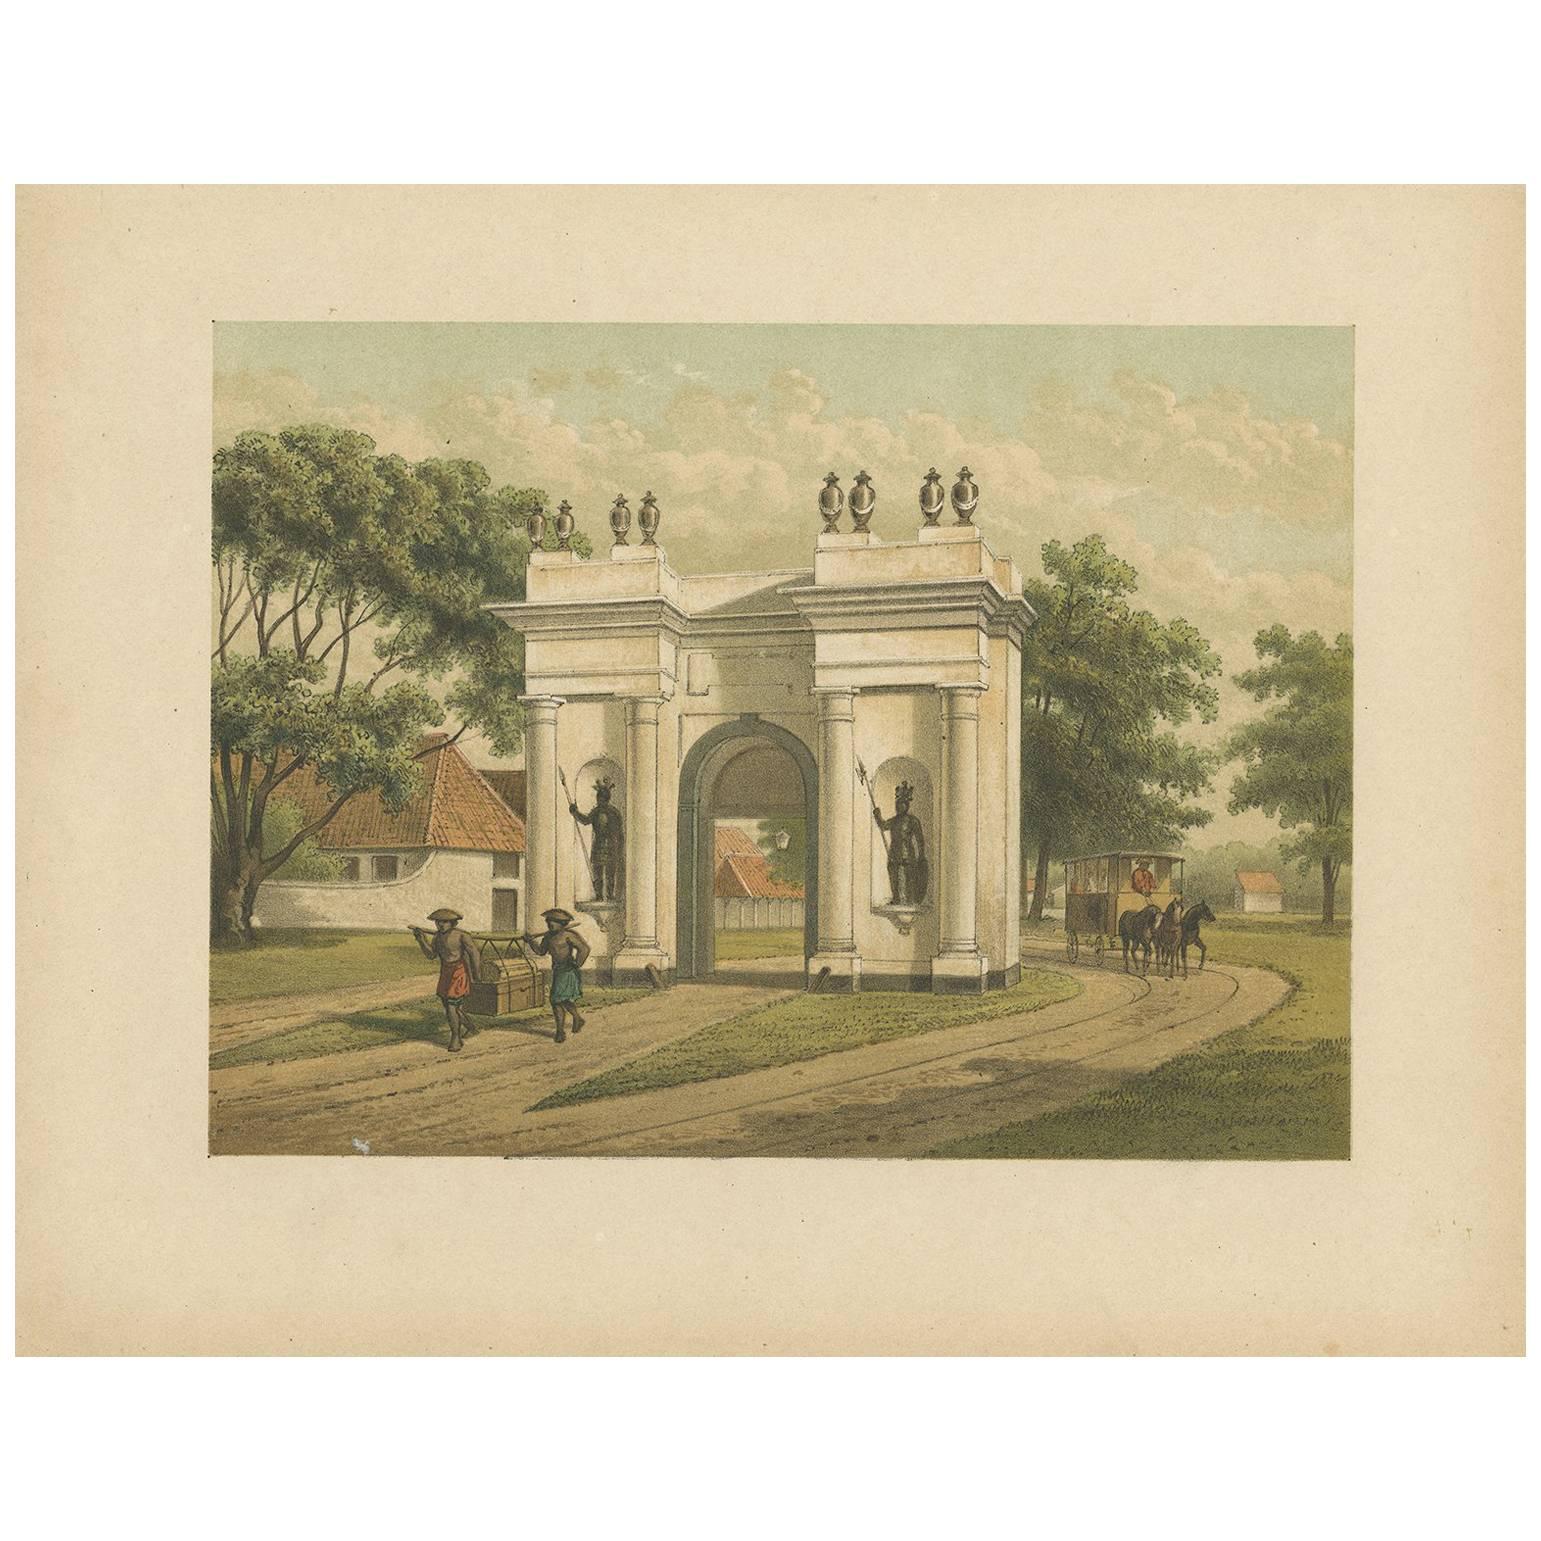 Antique Print of the Castle Gate of Batavia by M.T.H. Perelaer, 1888